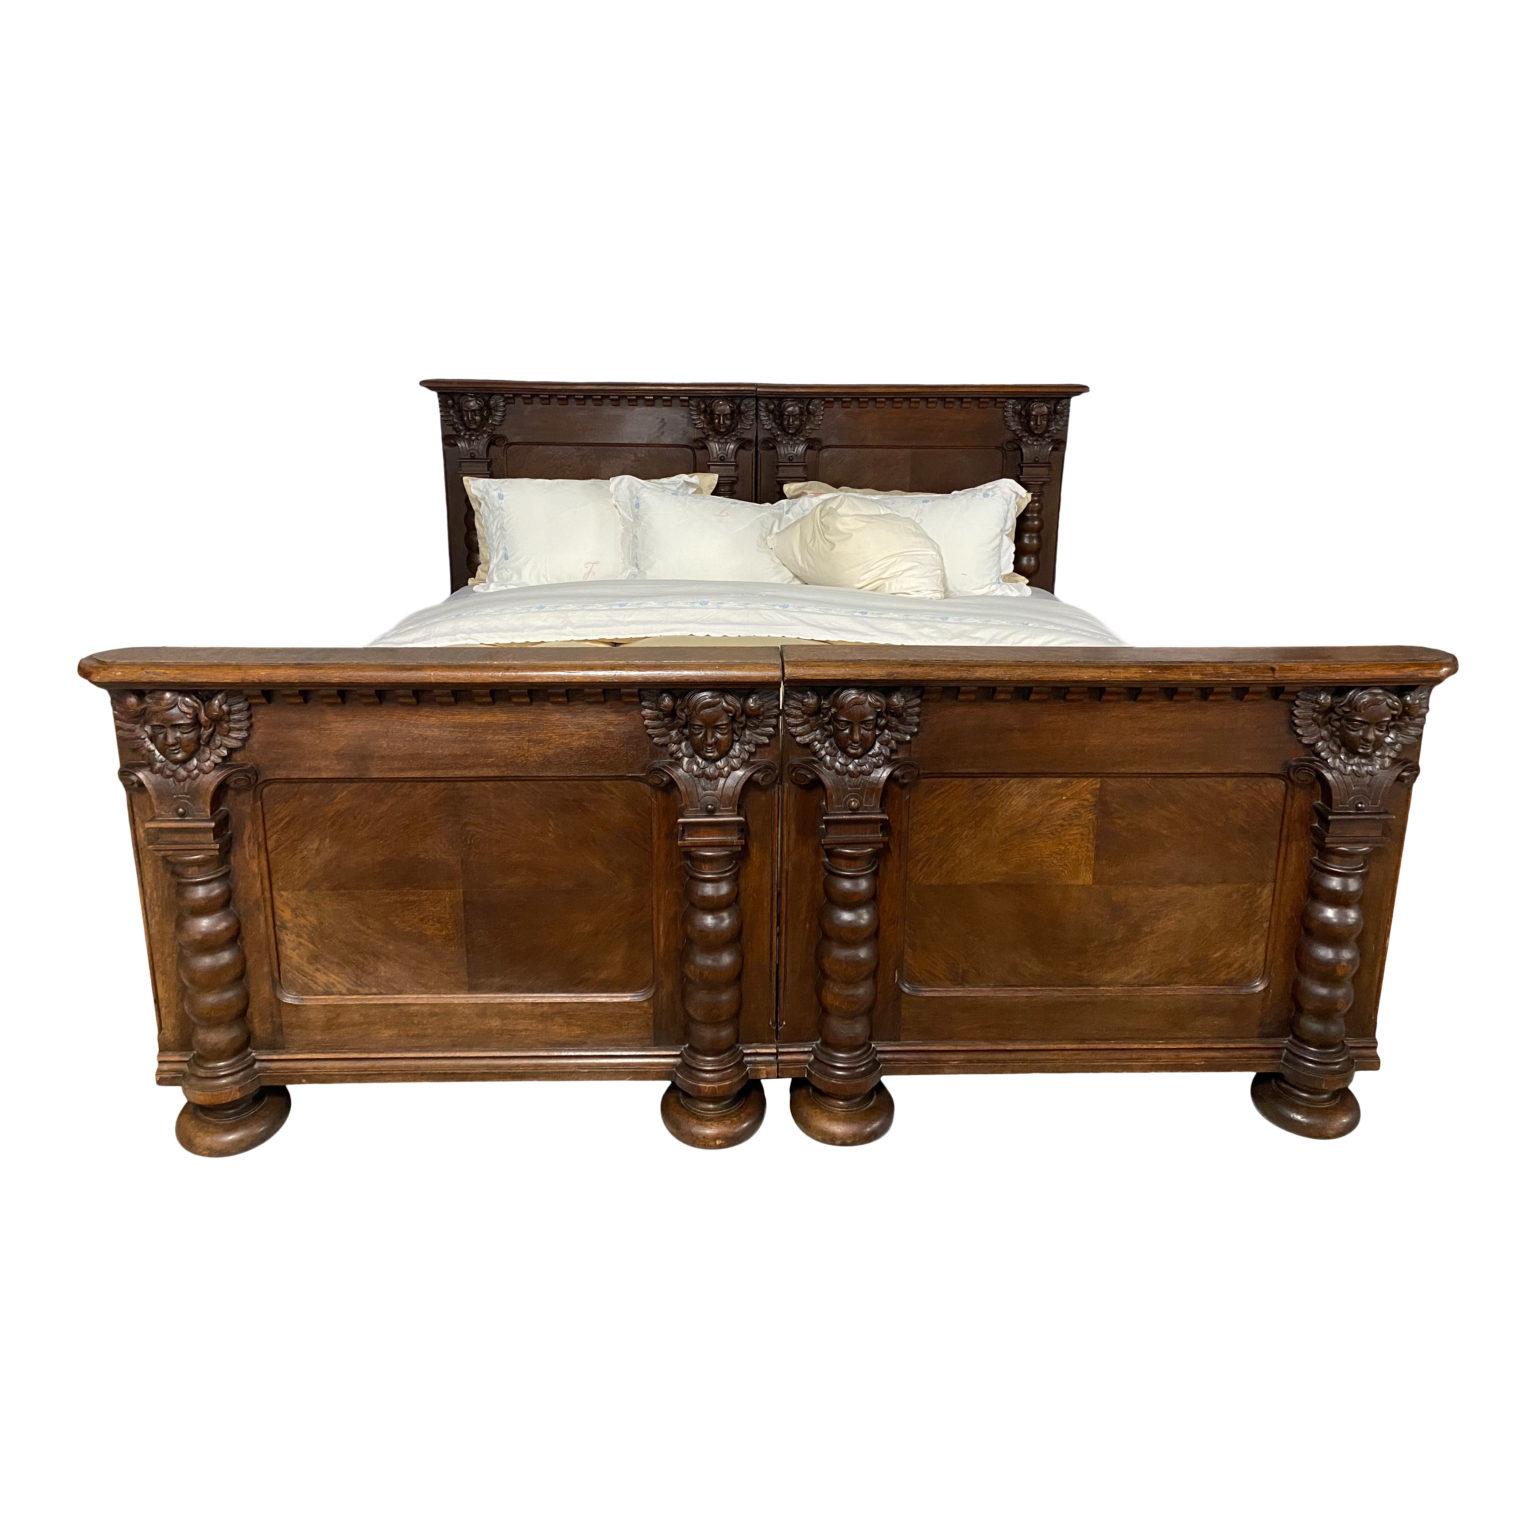 19th Century Antique Portugese Bed For Sale